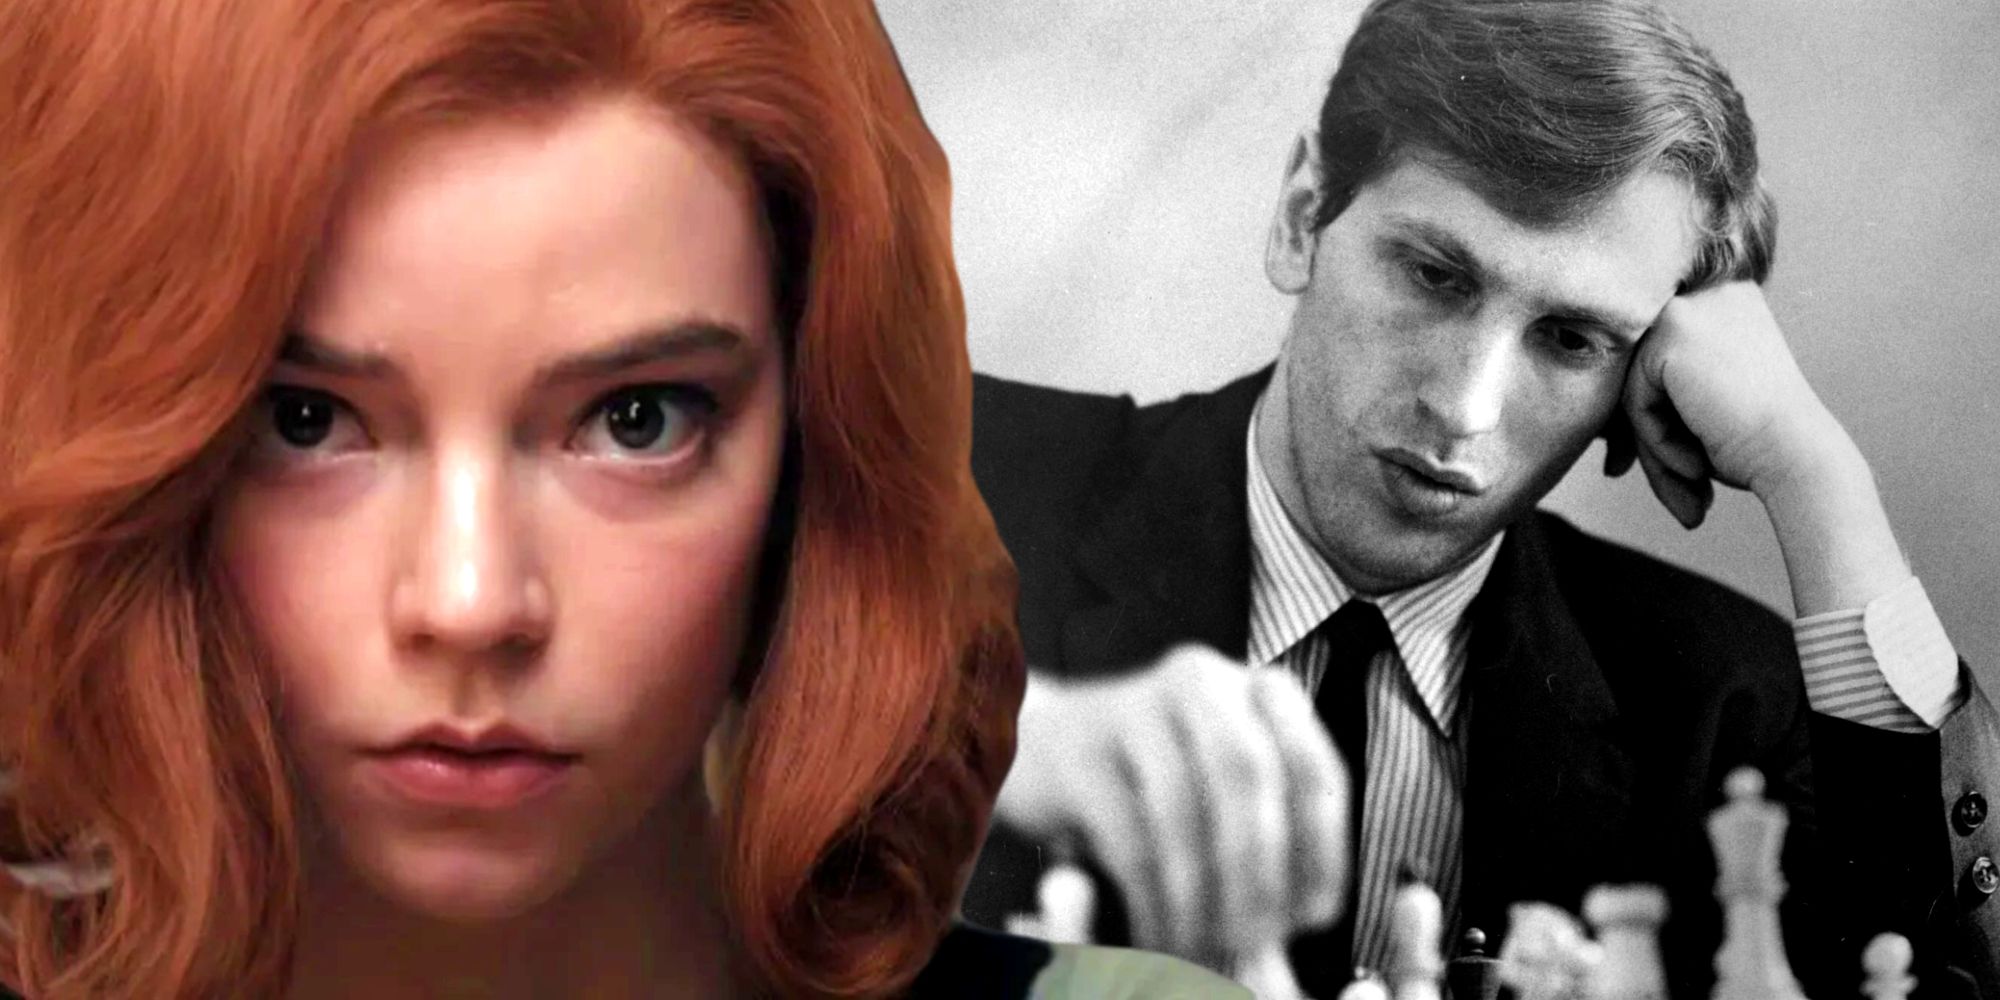 Is Beth Harmon From 'The Queen's Gambit' Based On A Real Person?